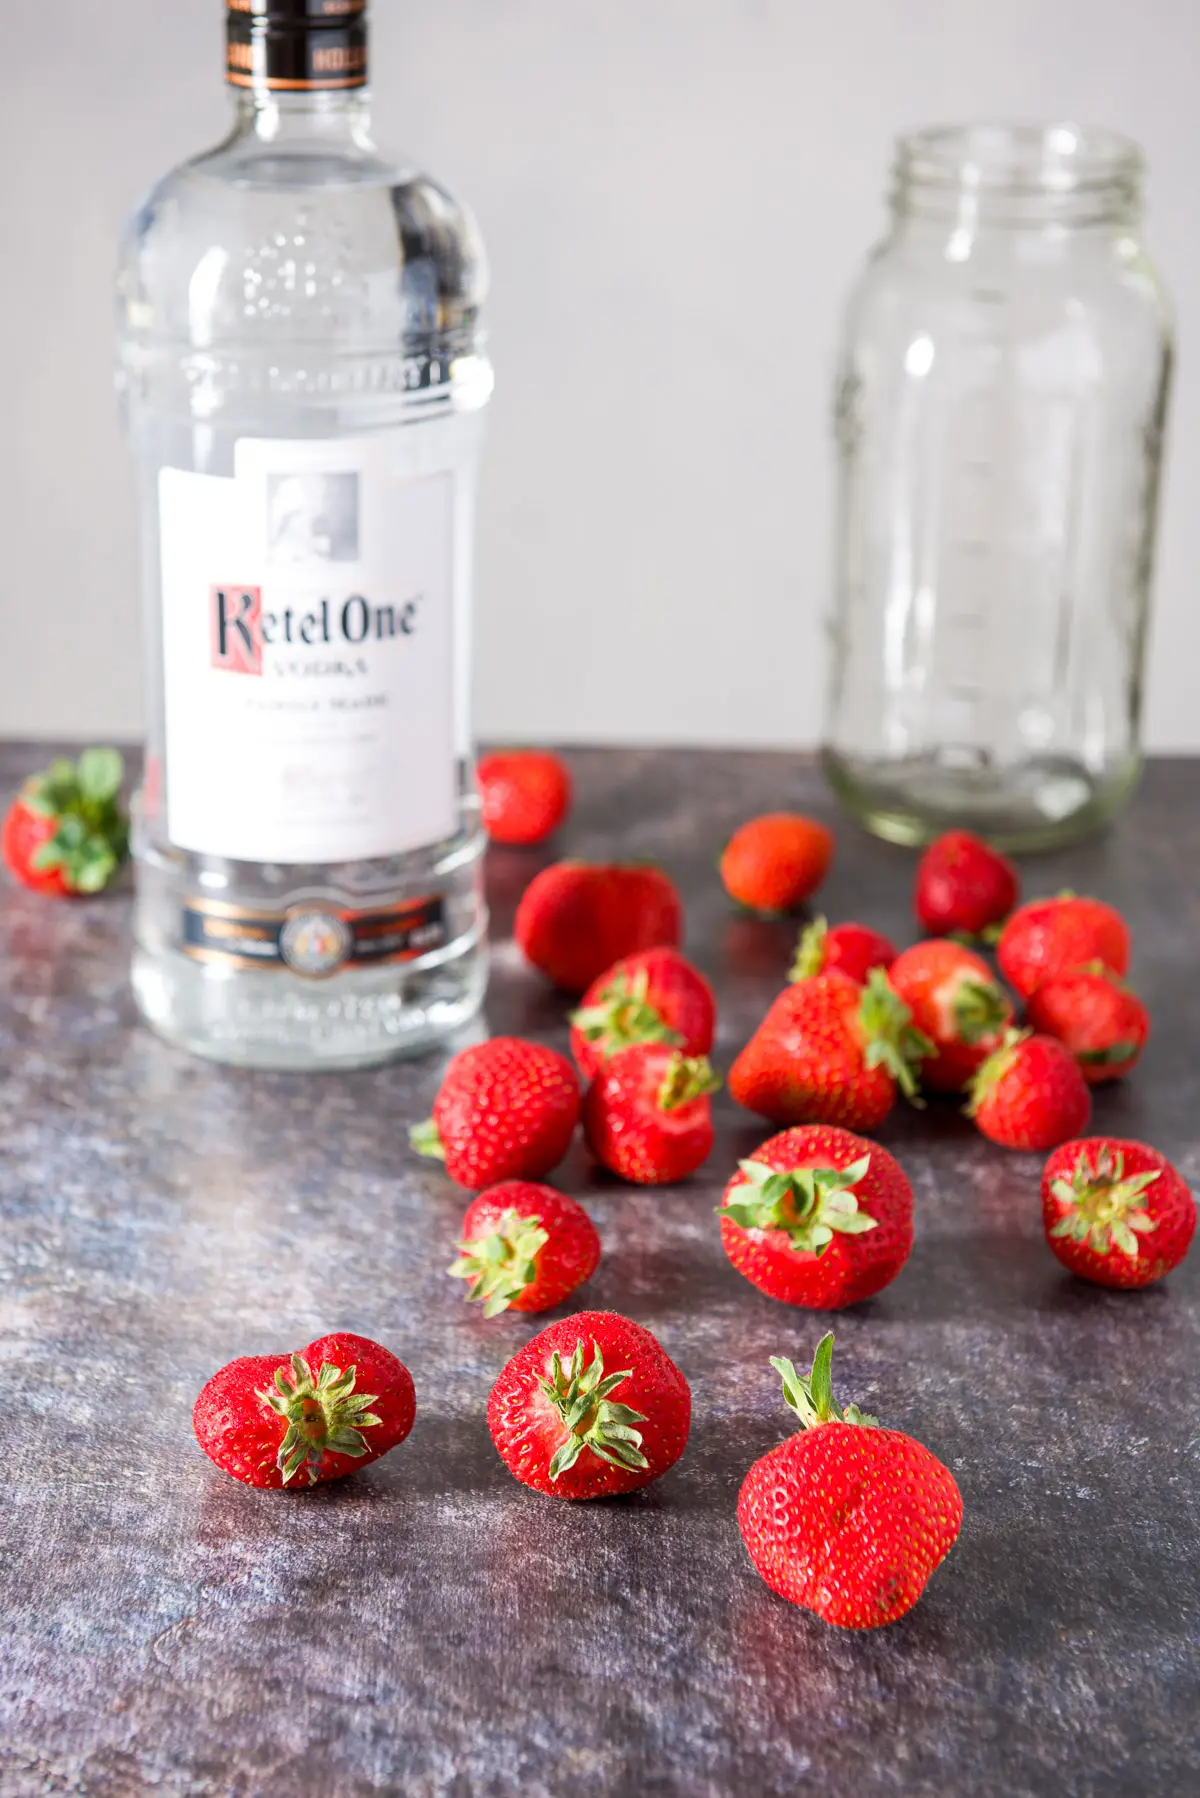 Strawberries on a table with a bottle of vodka along with a large jar